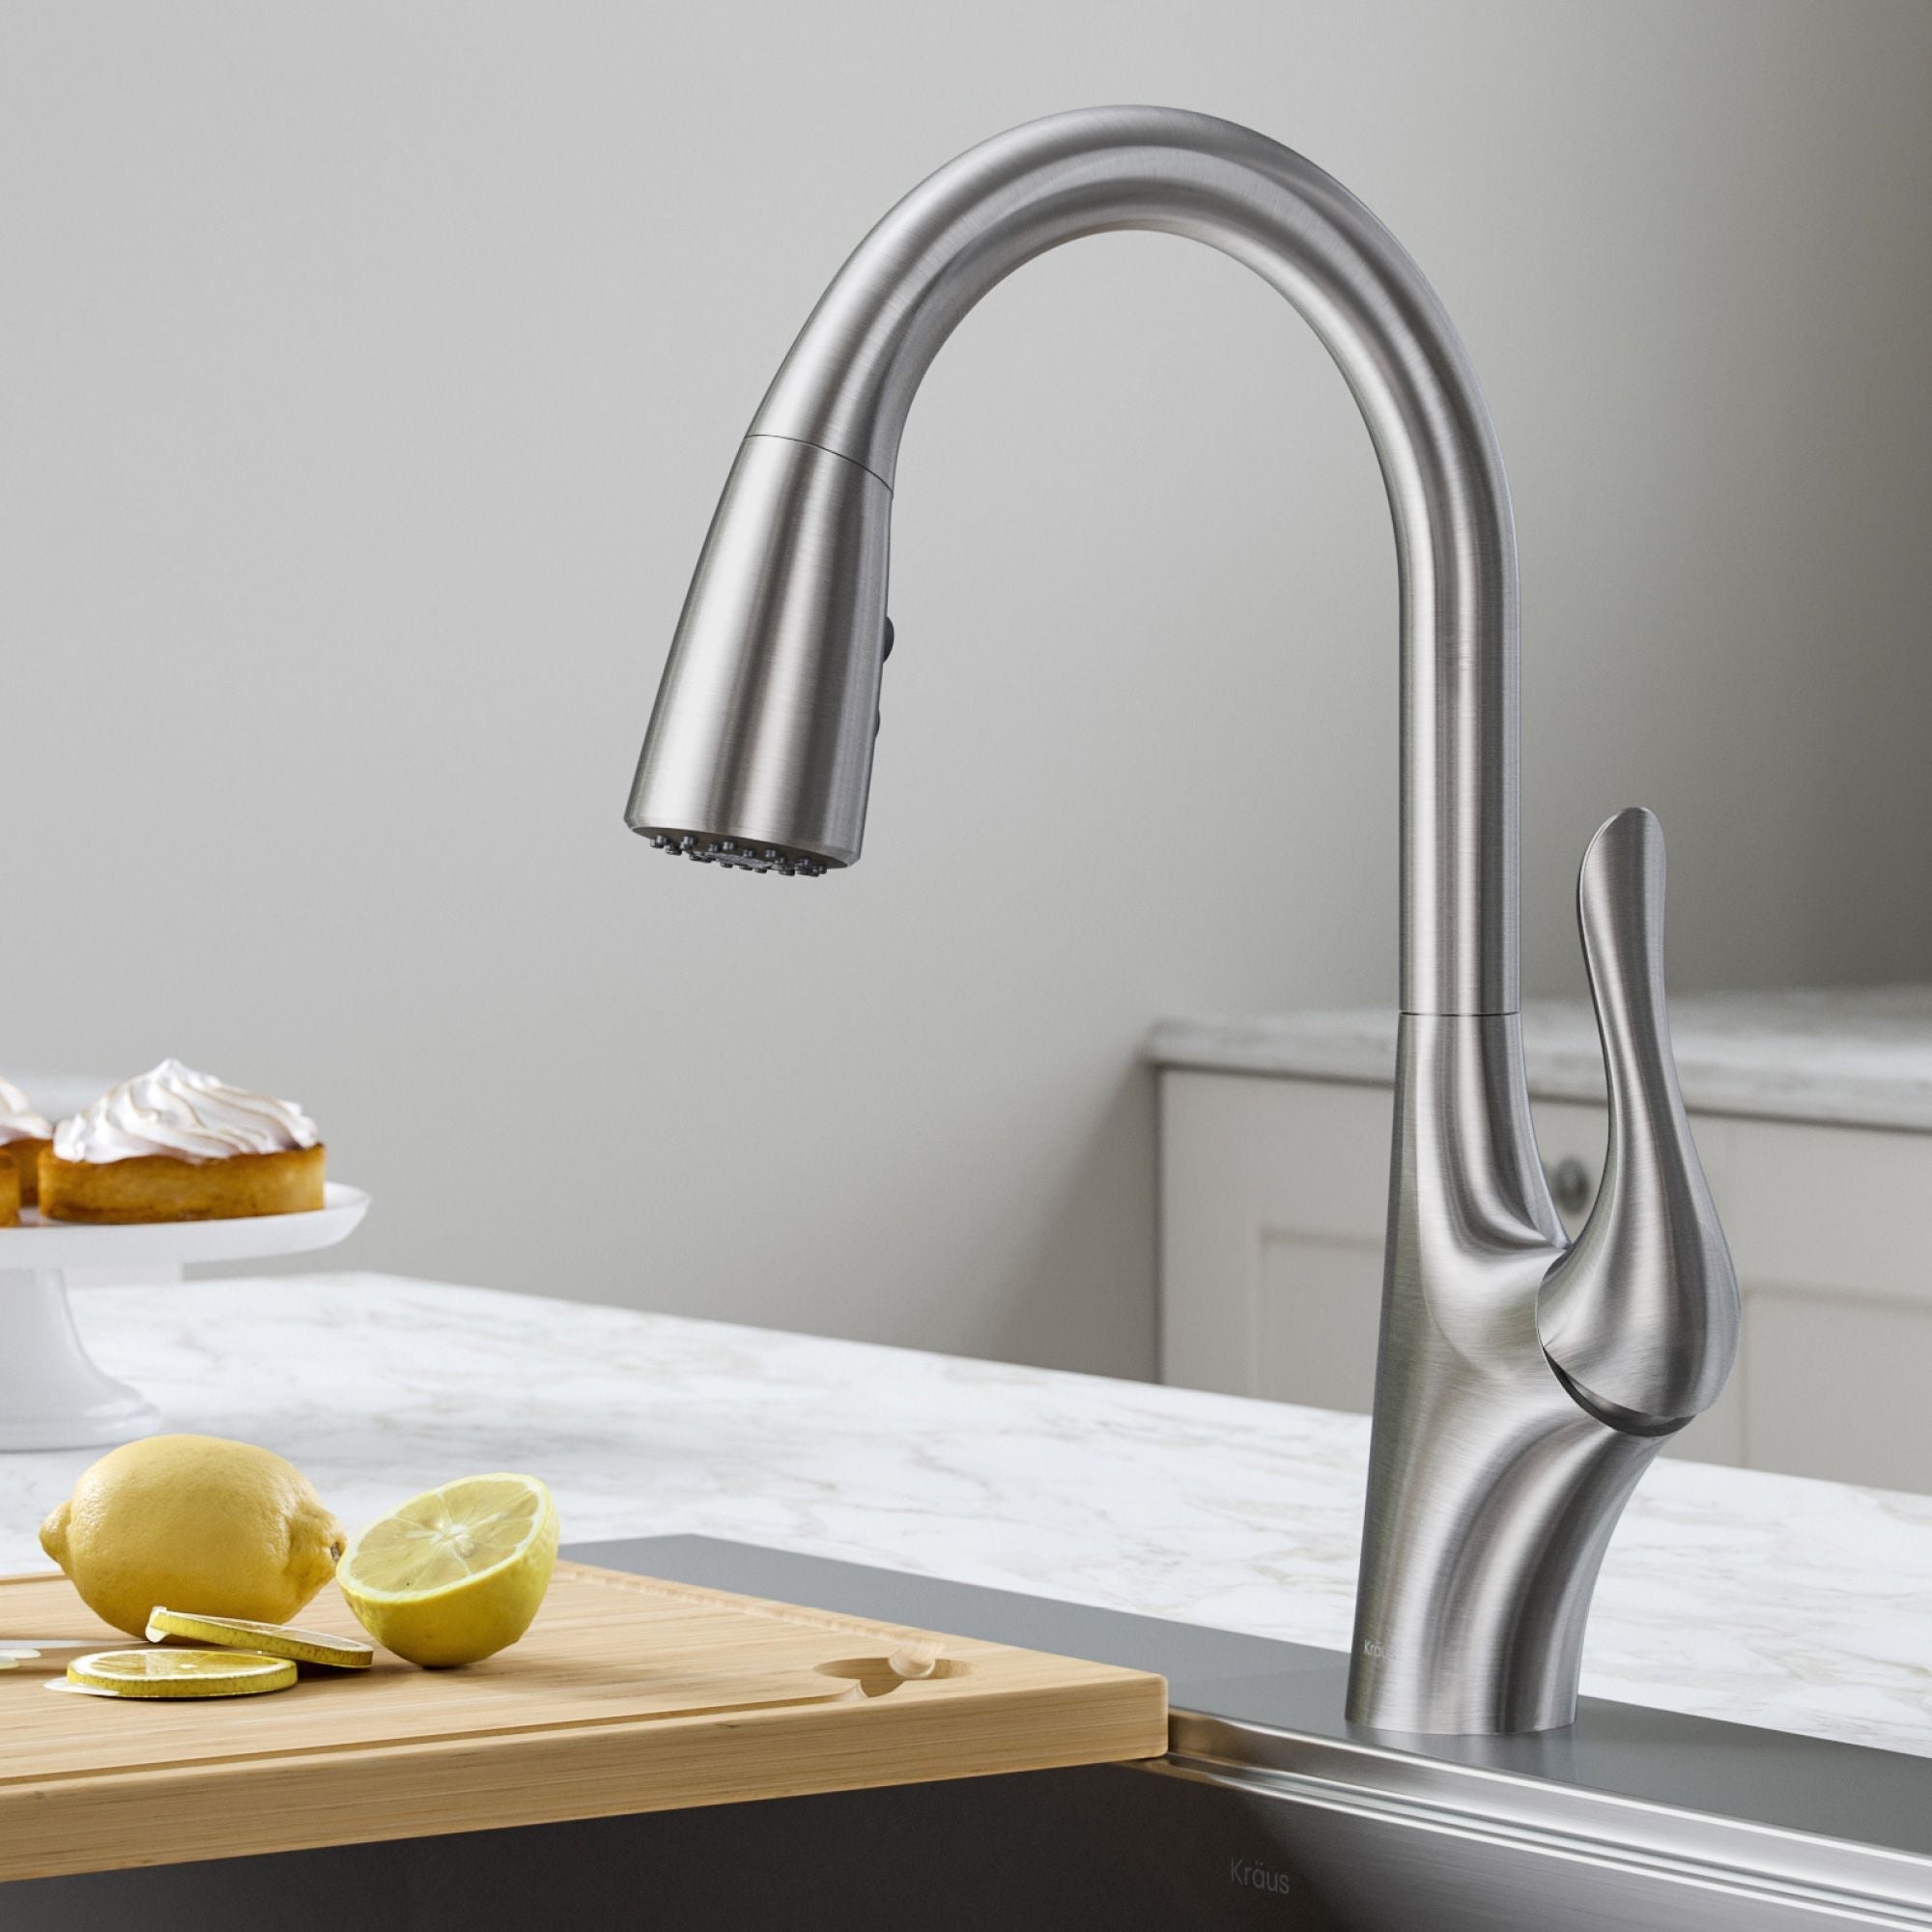 KRAUS Merlin™ Single Handle Pull-Down Kitchen Faucet in Spot Free Stainless Steel-Kitchen Faucets-KRAUS